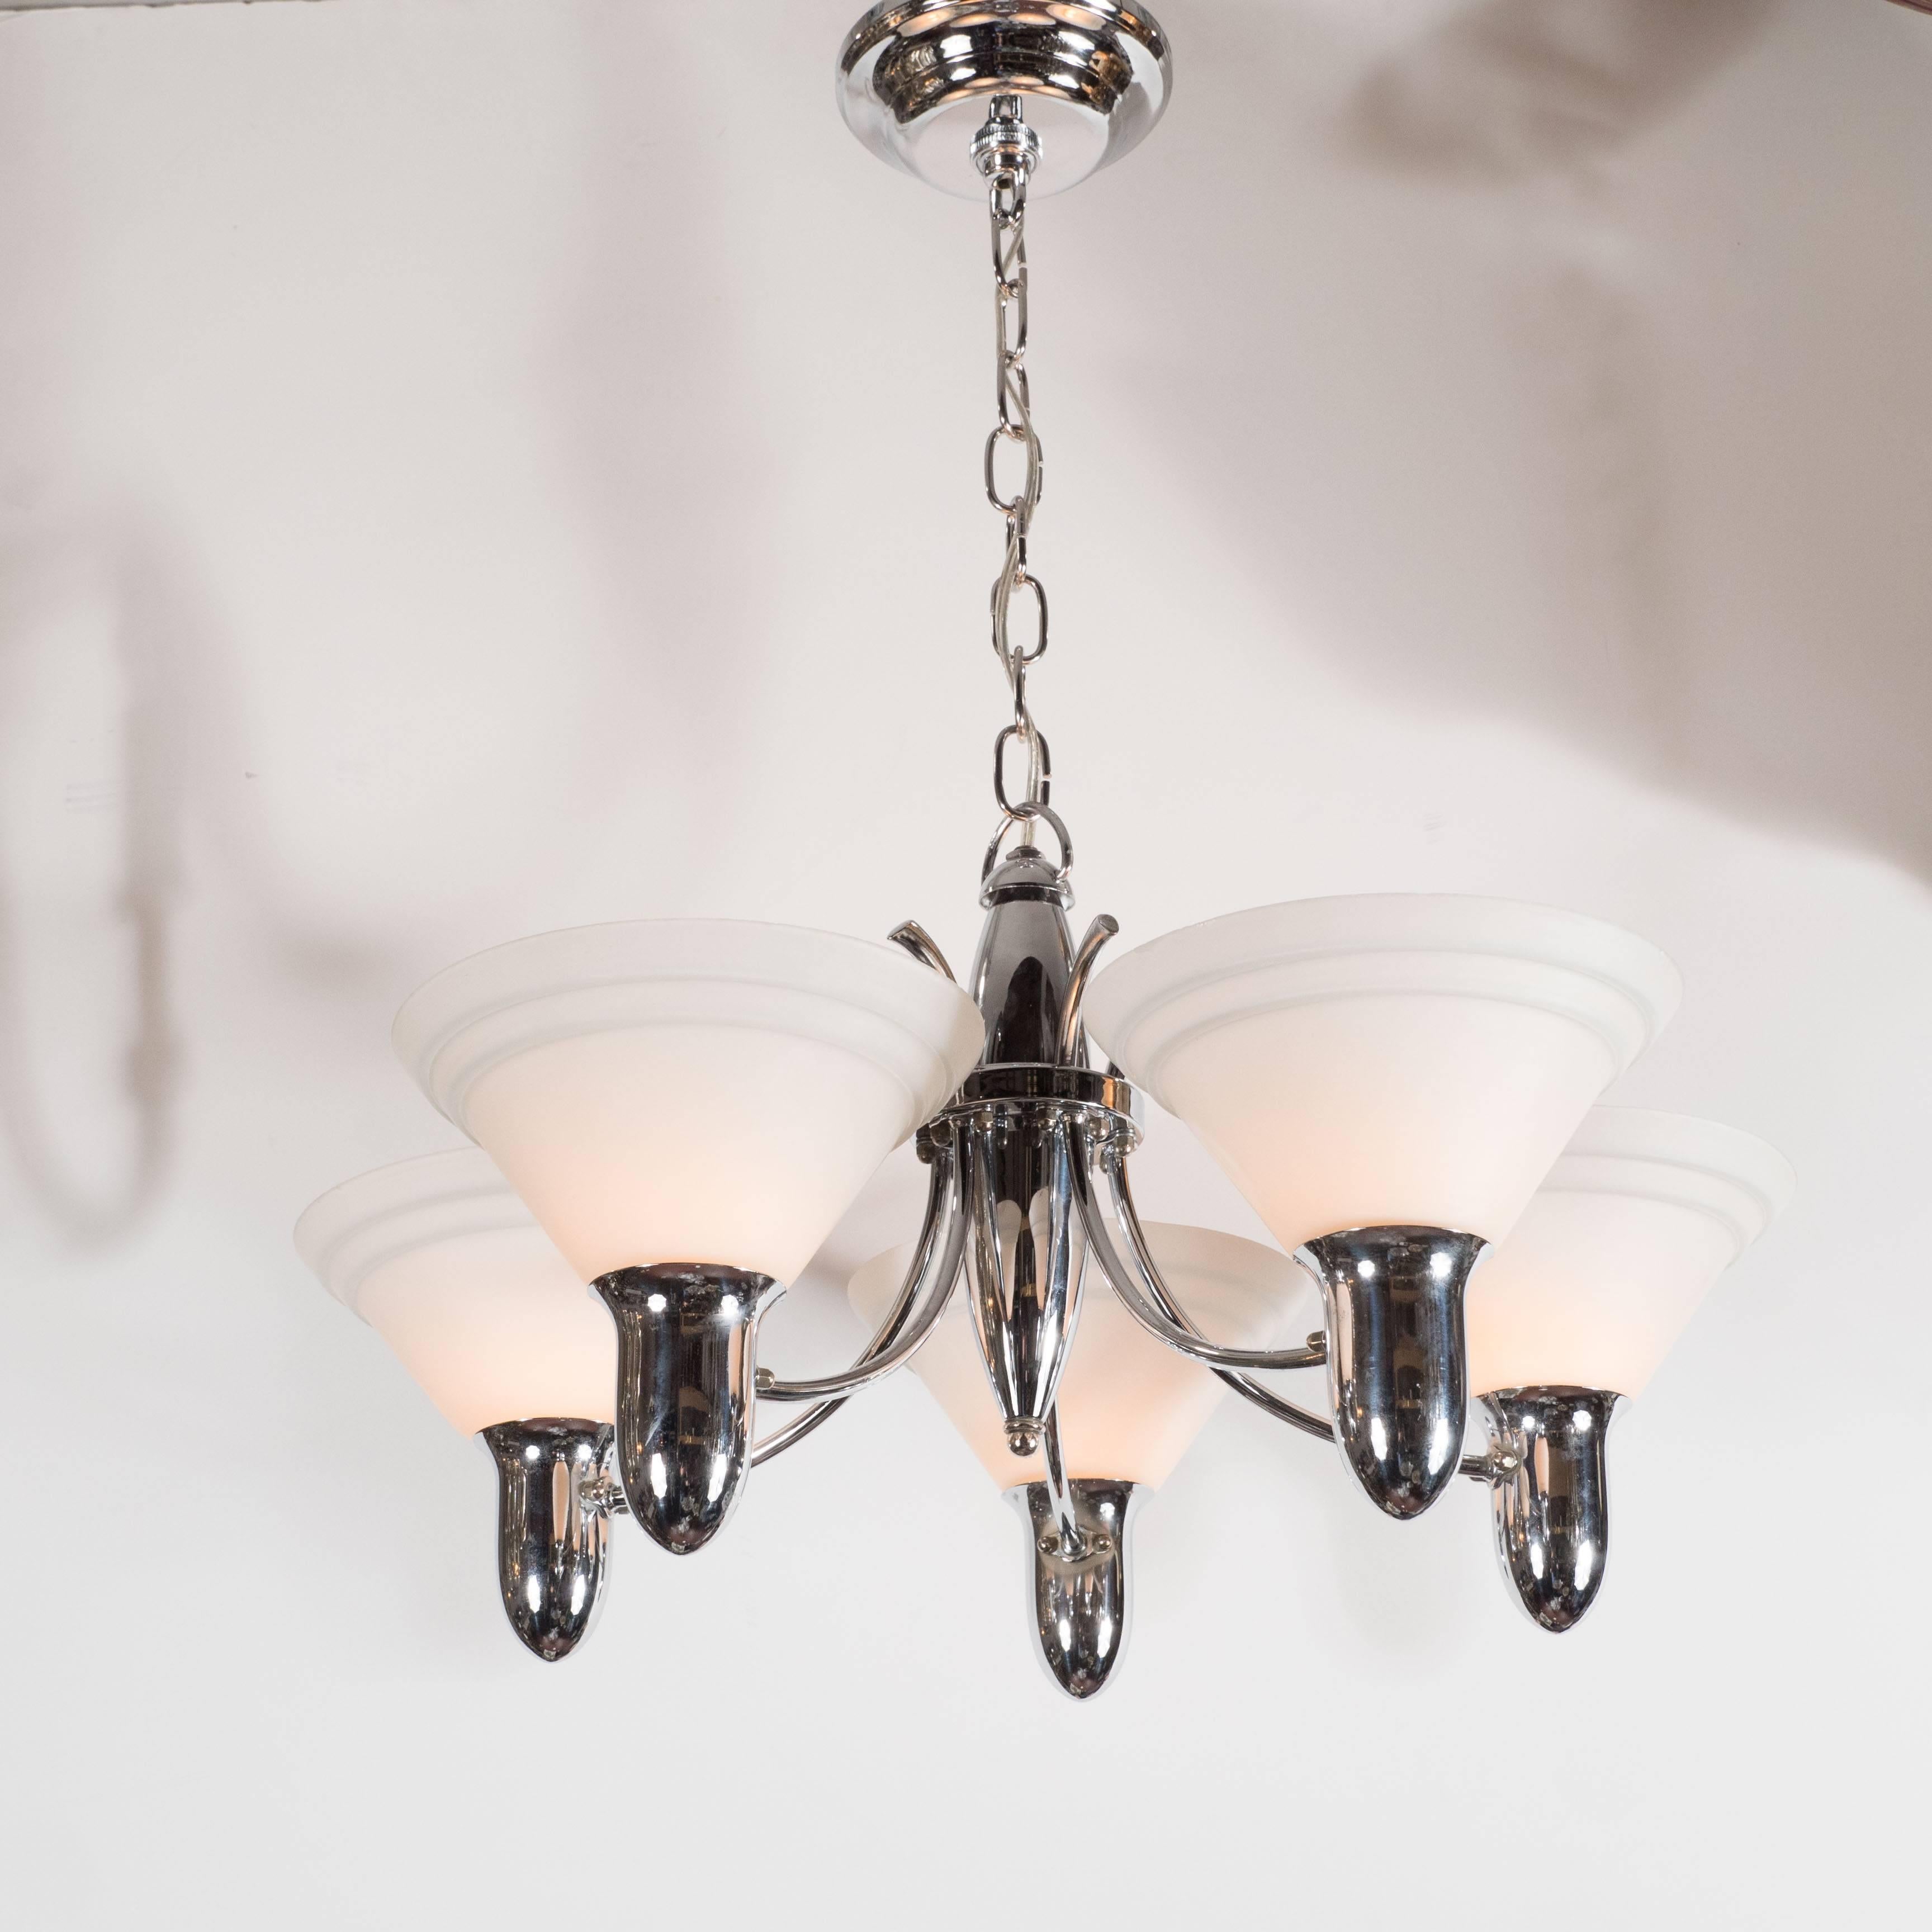 This wonderful chandelier is made of polished chrome and fitted with five uplight with hand blown crème glass shades with lineal detailing in grey. A great example of The Machine Ages influence on Art Deco in America. This piece has been completely